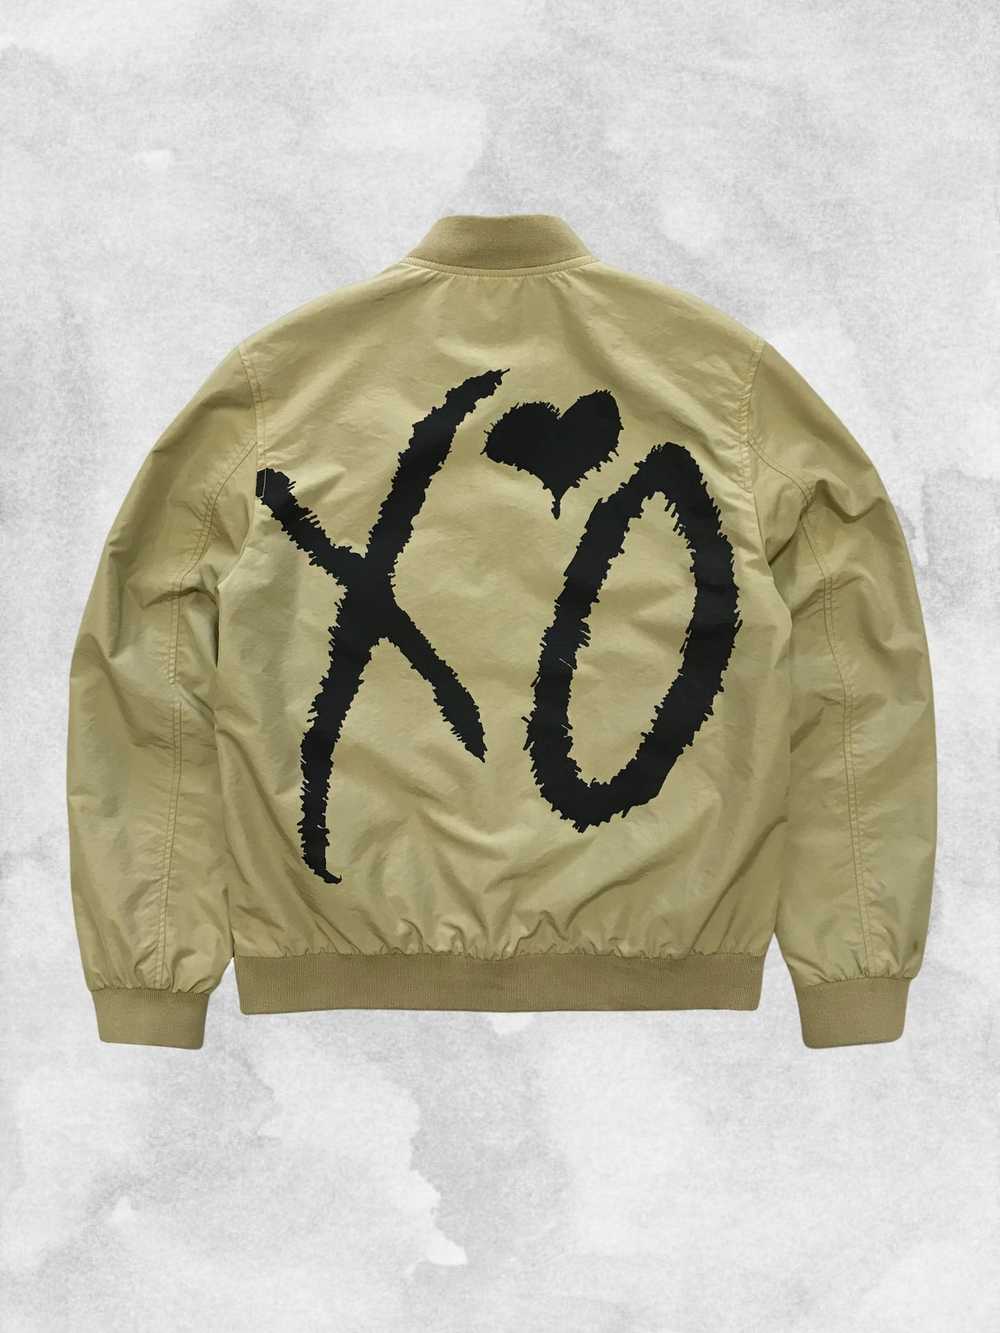 H&M × The Weeknd × XO XO THE WEEKND x H&M Bomber … - image 1